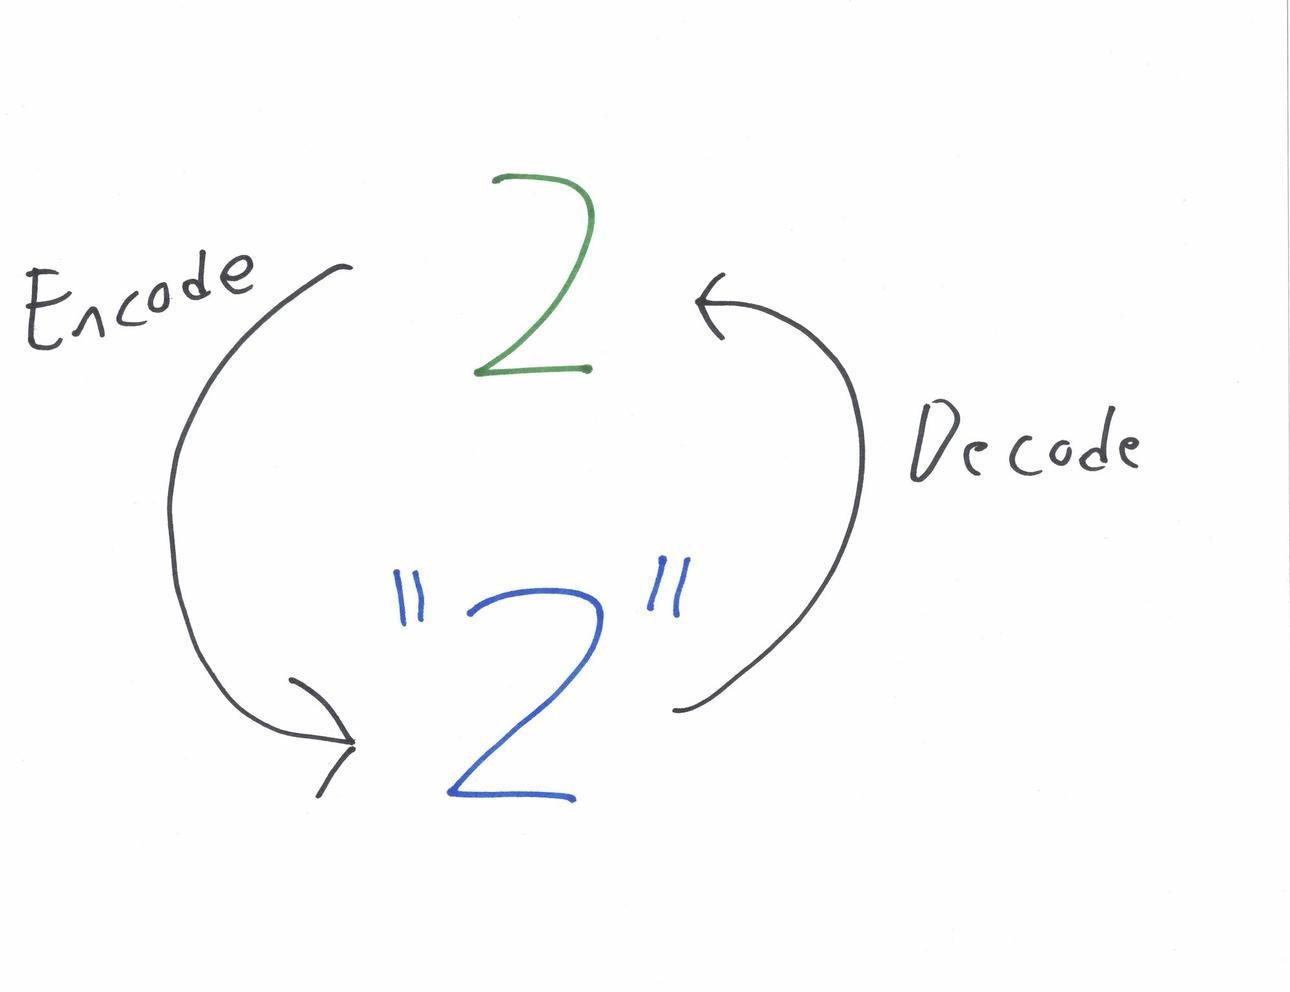 A loop between encoding and decoding